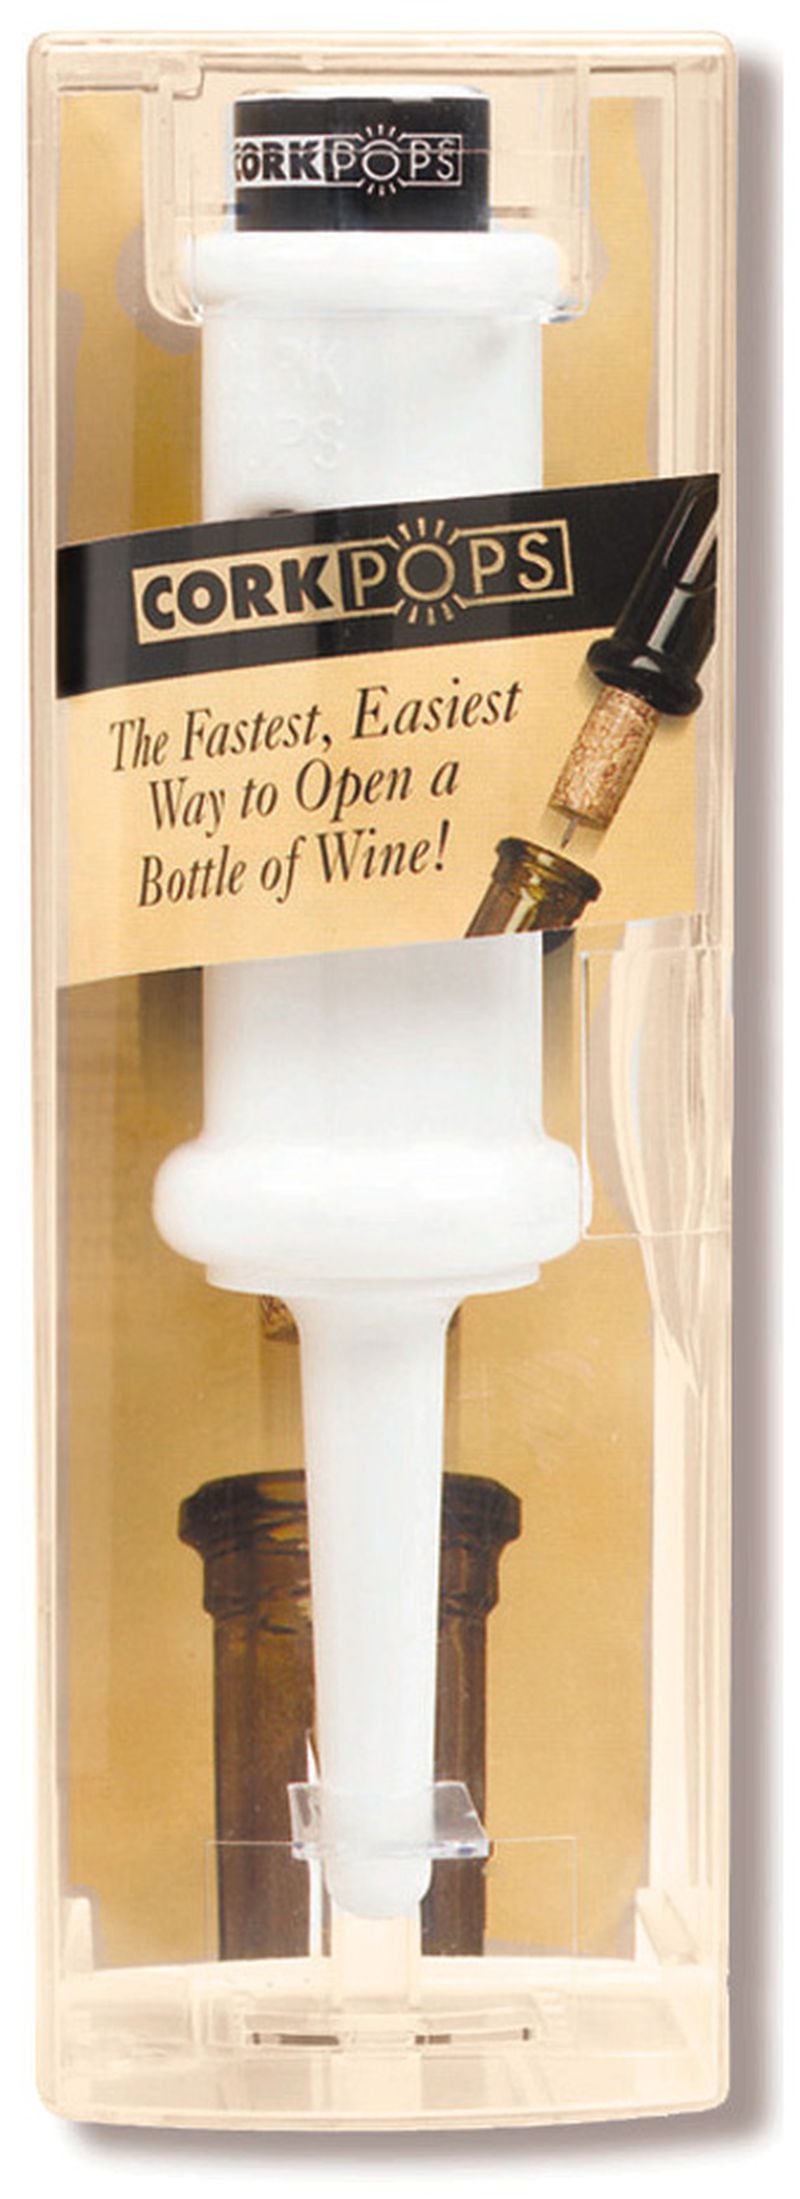 Cork Pops come in red or white and easily pop a wine cork from a bottle.
Courtesy of Cork Pops